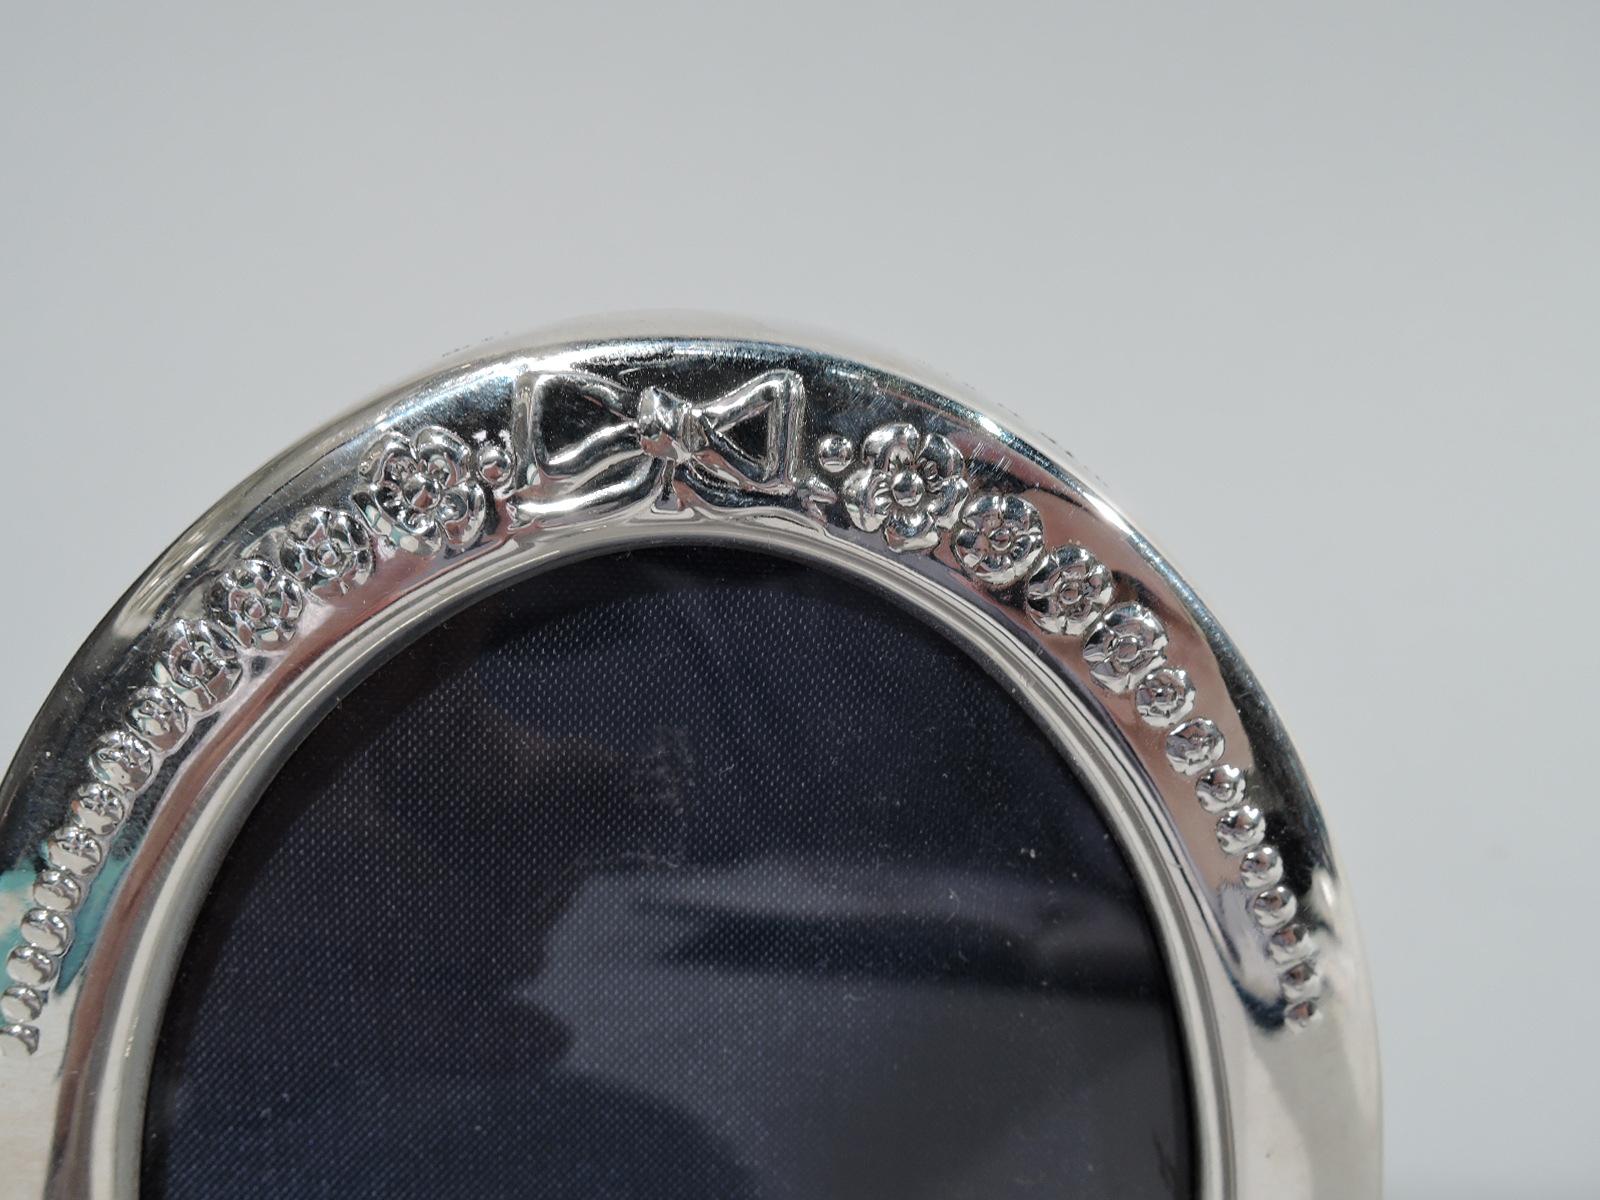 Old fashioned sterling silver picture frame. Made by Carr’s of Sheffield in 1990. Oval window and surround with chased bow and blossoms graduating to beads. With glass, silk lining, and velvet back and hinged support. Hallmarked. 

Dimensions: